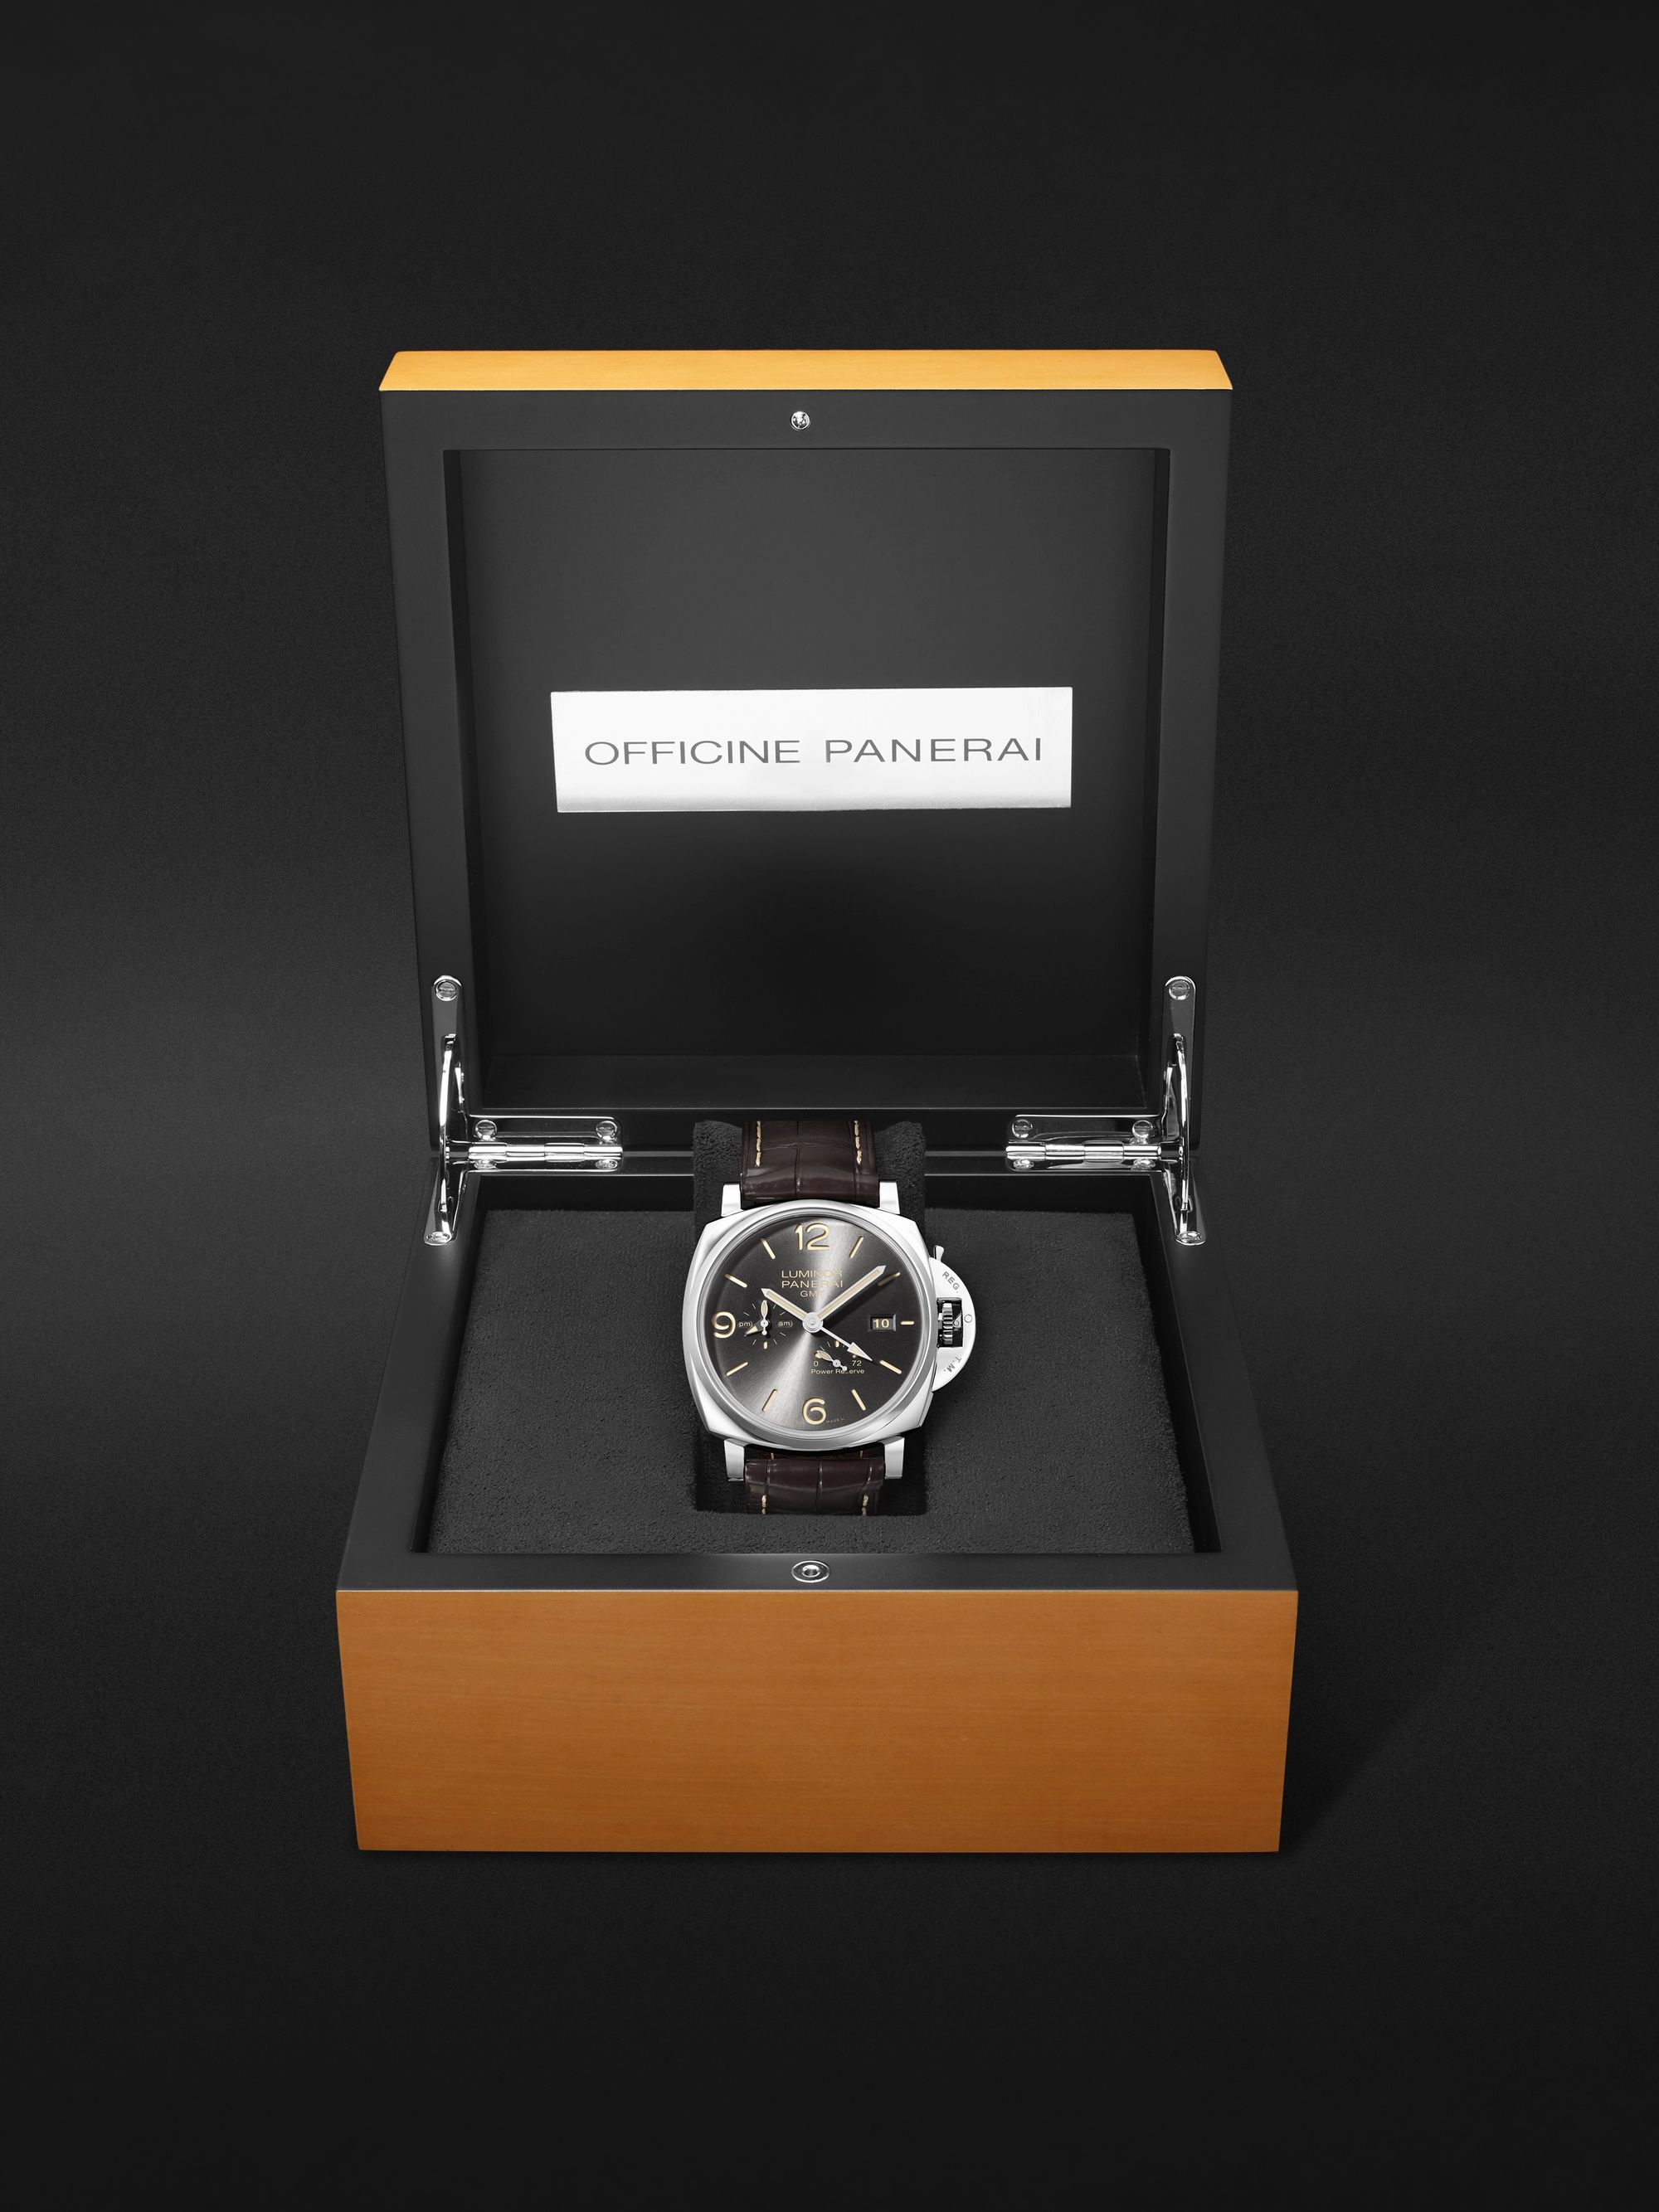 PANERAI Luminor Due GMT Power Reserve Automatic 45mm Stainless Steel and Alligator Watch, Ref. No. PAM00944